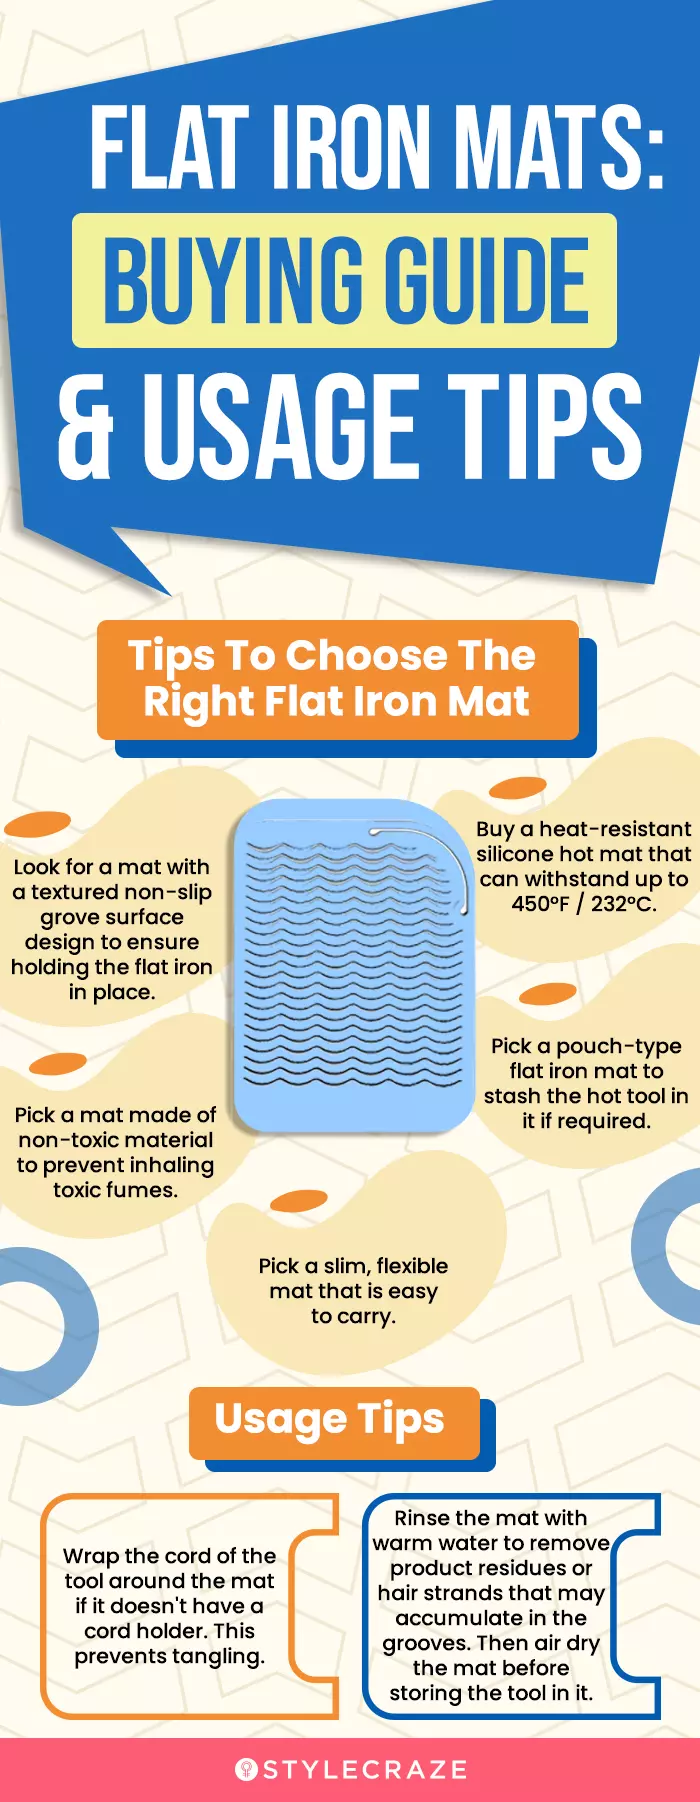 Flat Iron Mats Buying Guide & Usage Tips(infographic)